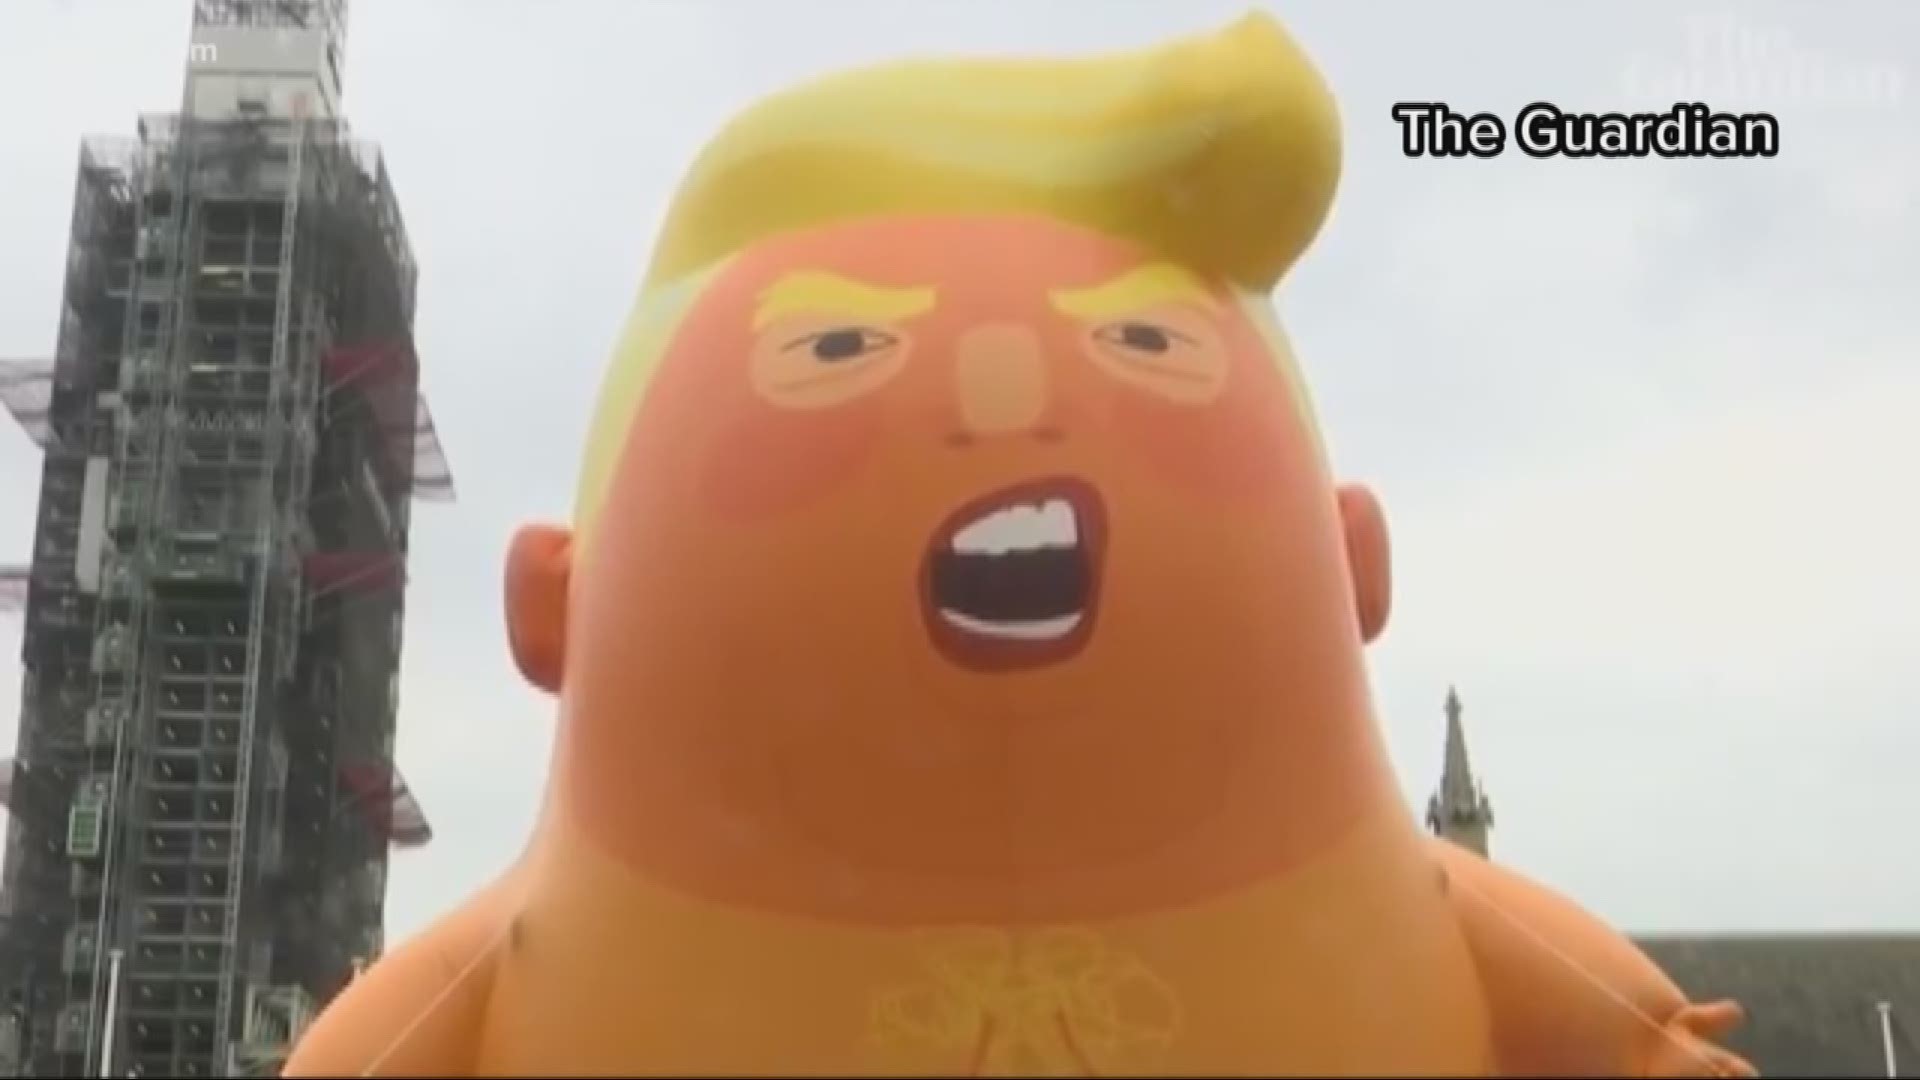 Activists wants to overhaul the current D.C. firework event with his own speech. Now, a group wants to fly the baby Trump balloon during the same time.